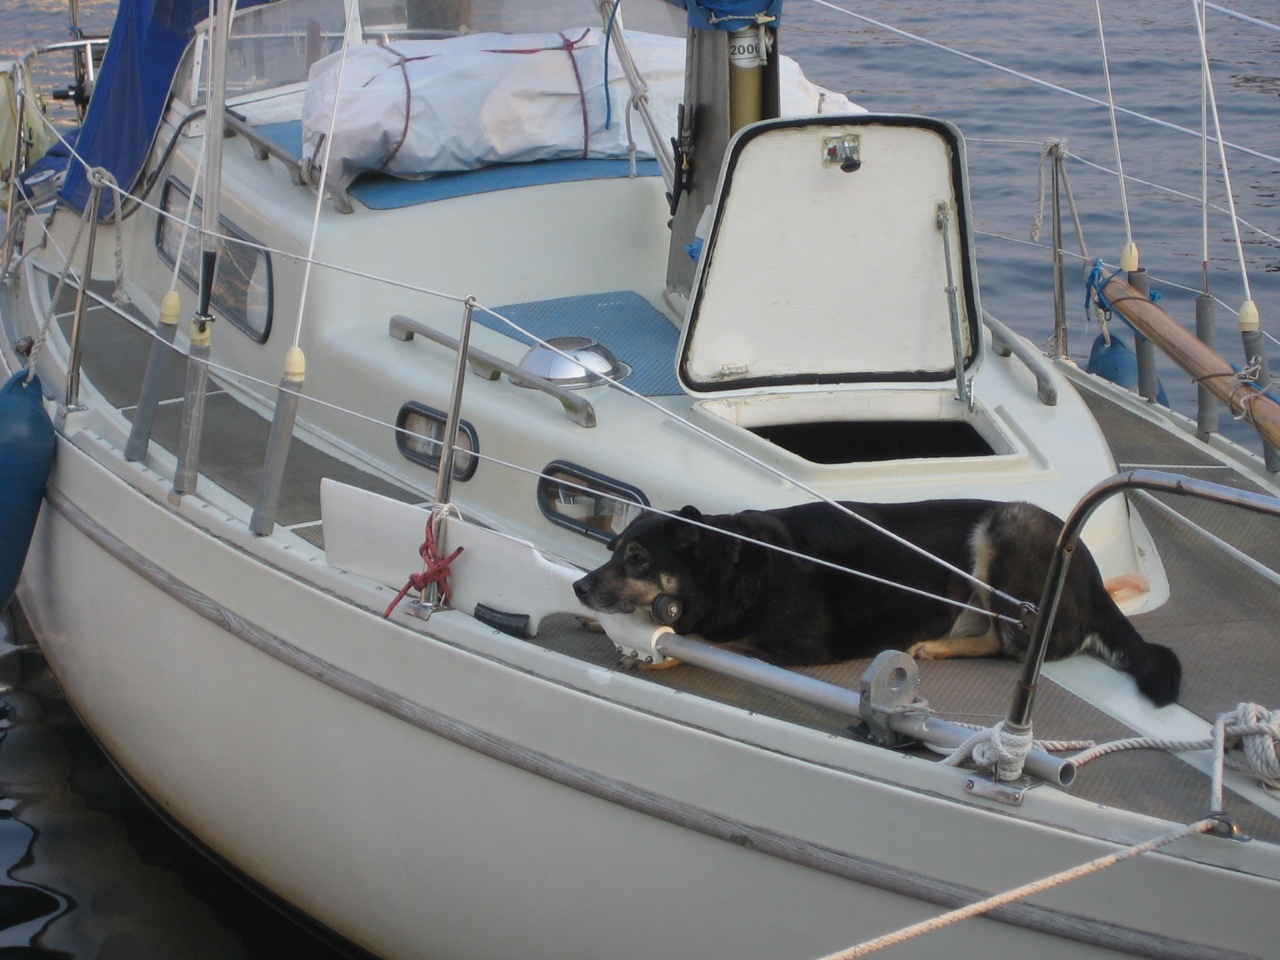 the dog is laying on a boat docked